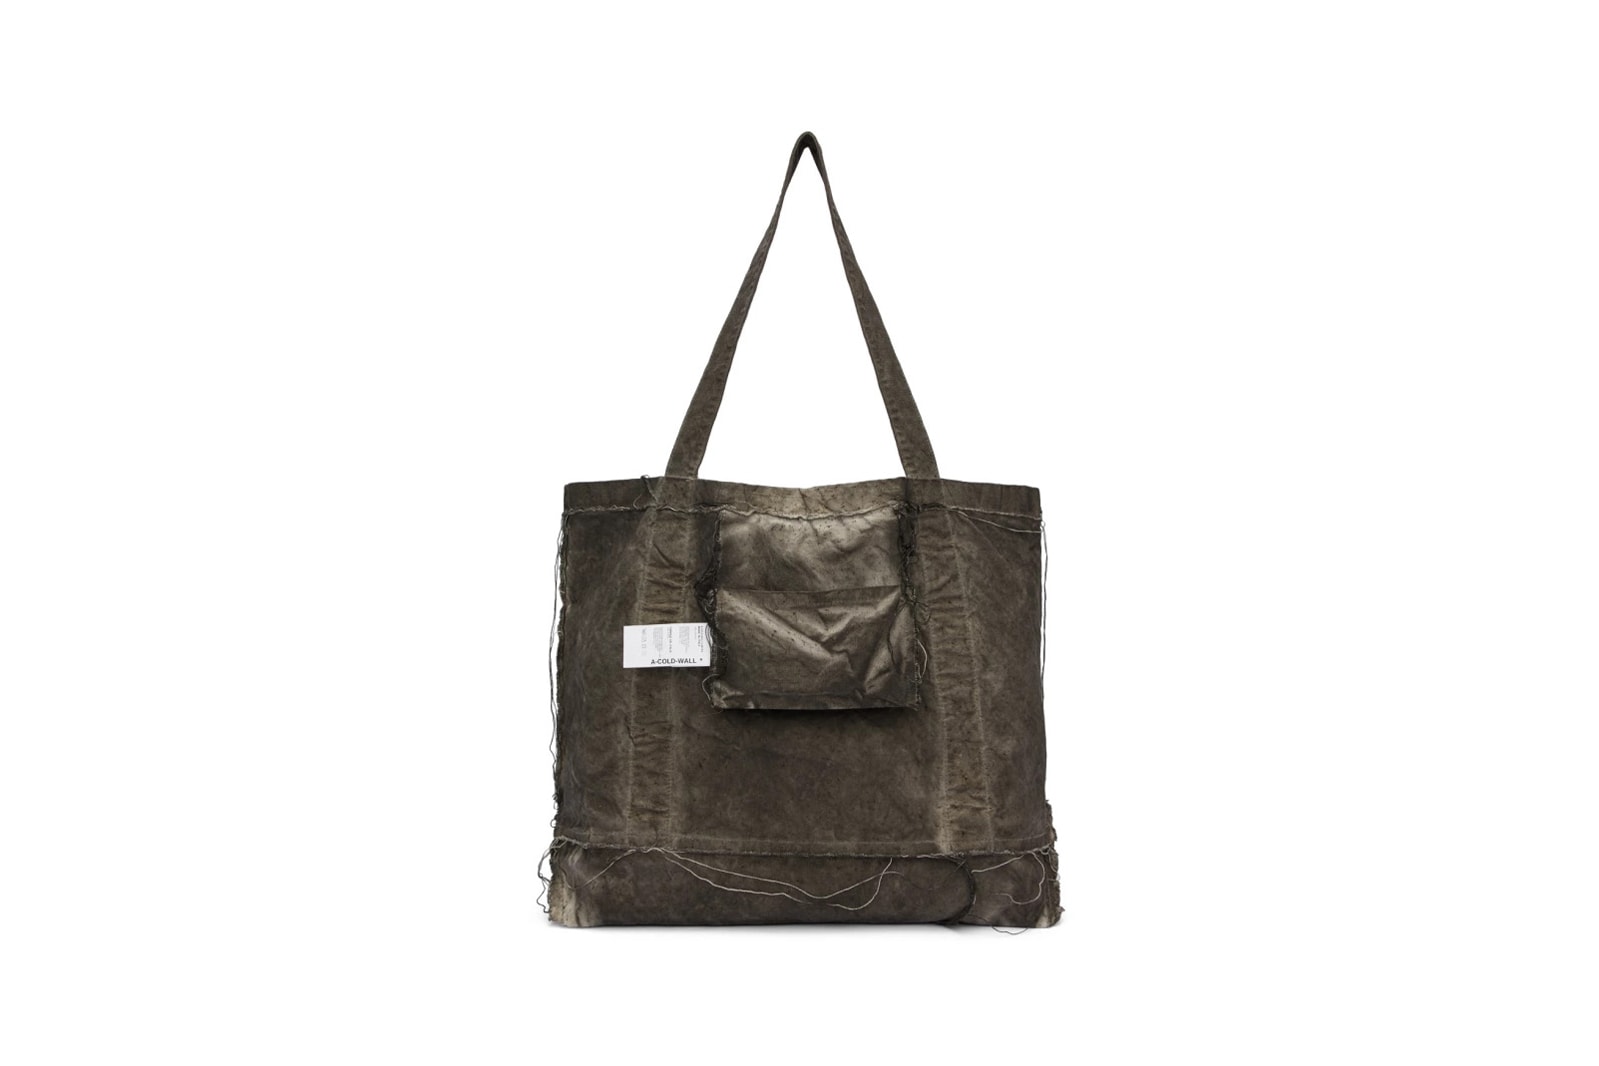 A Cold Wall Canvas Tote Slate Grey